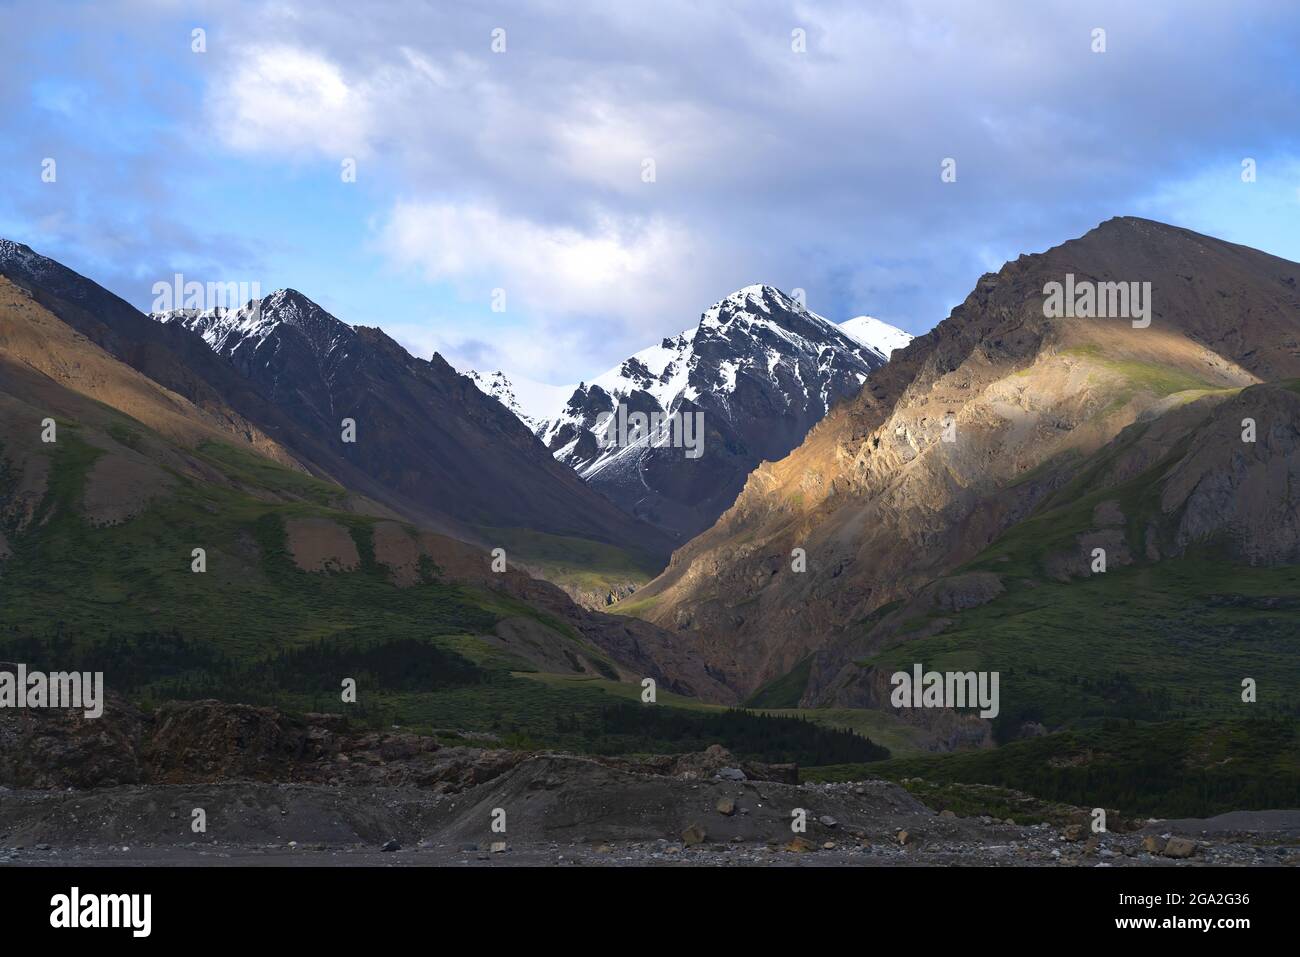 The landscape of Kluane National Park with mountain slopes covered in green vegetation and snowcapped mountain peaks on the horizon. An amazing pla... Stock Photo